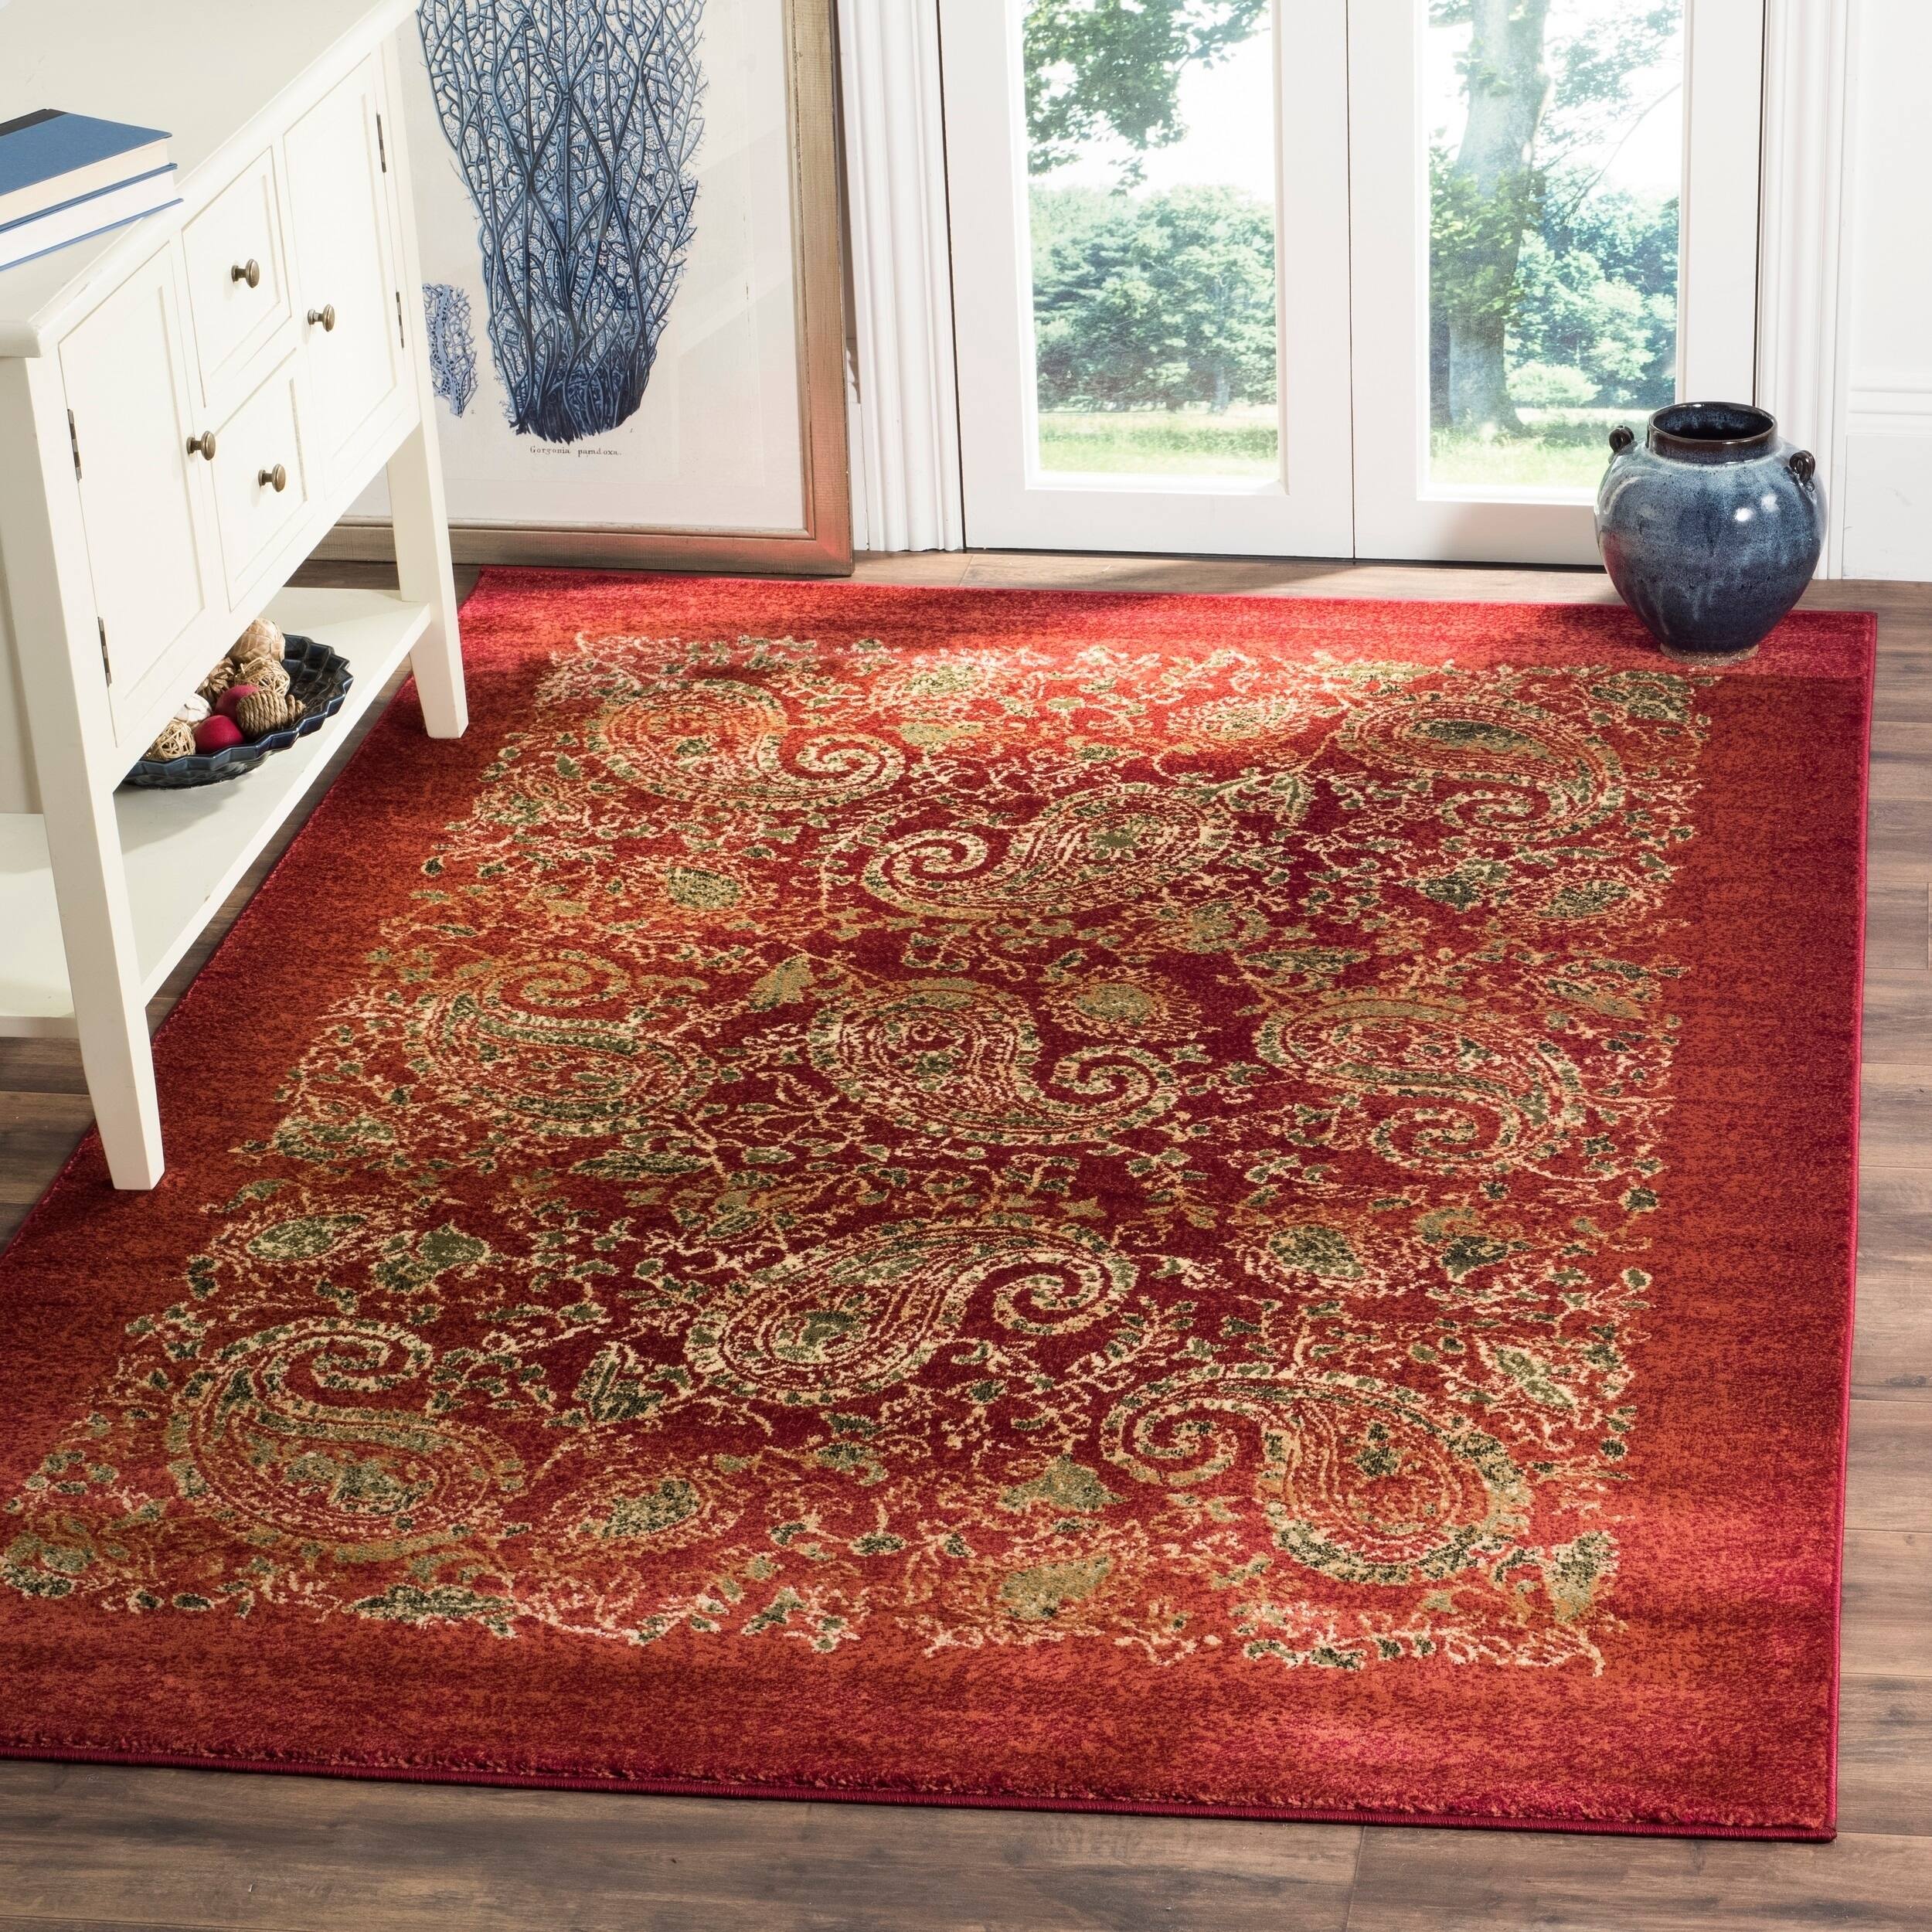 Buy 7x9 - 10x14 Rugs Online at Overstock.com | Our Best Area Rugs Deals